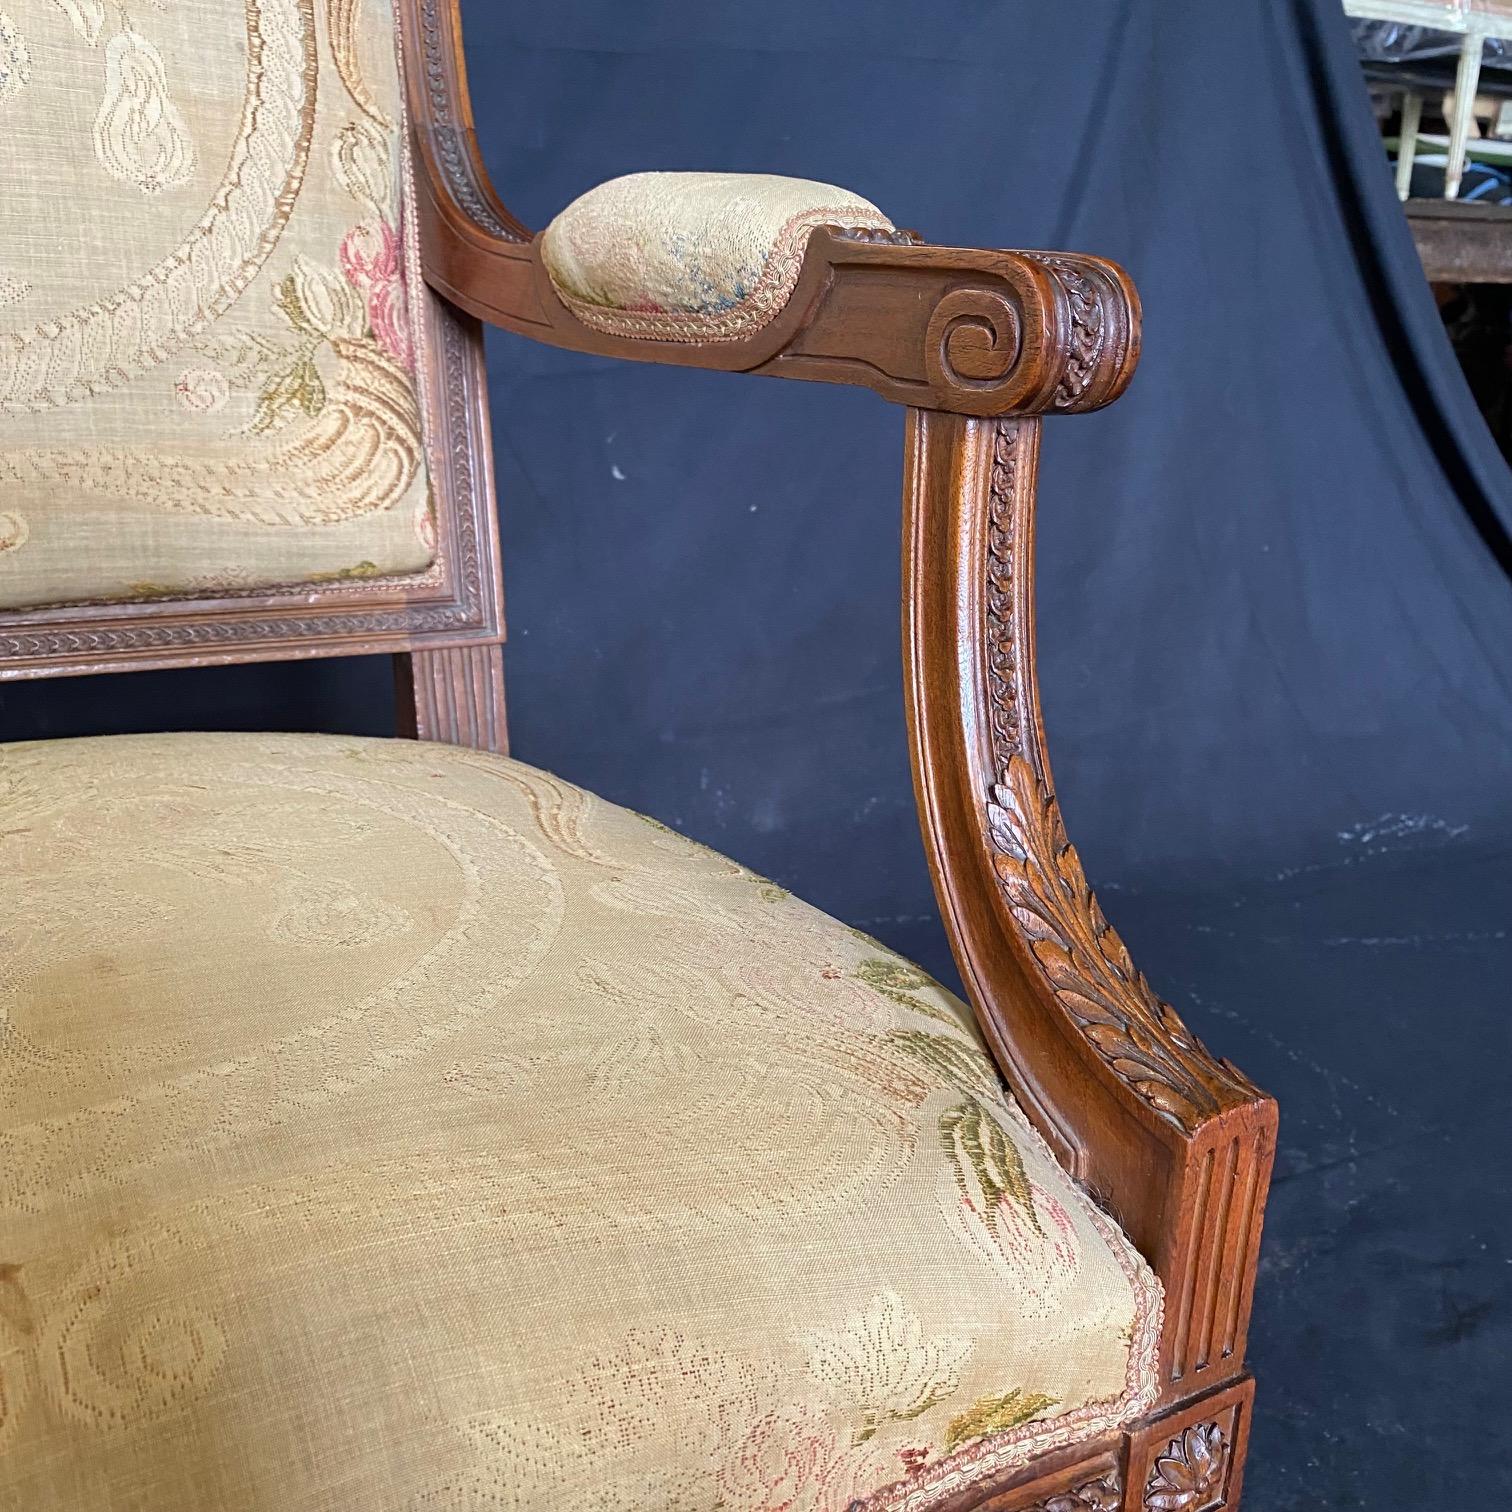 Incredible set of four early 19th century museum worthy French Louis XVI walnut fauteuils or armchairs. Exquisite carving all around, with florets at the top of each beautiful spiral turned tapered leg.  Acanthus leaves are carved into the base of